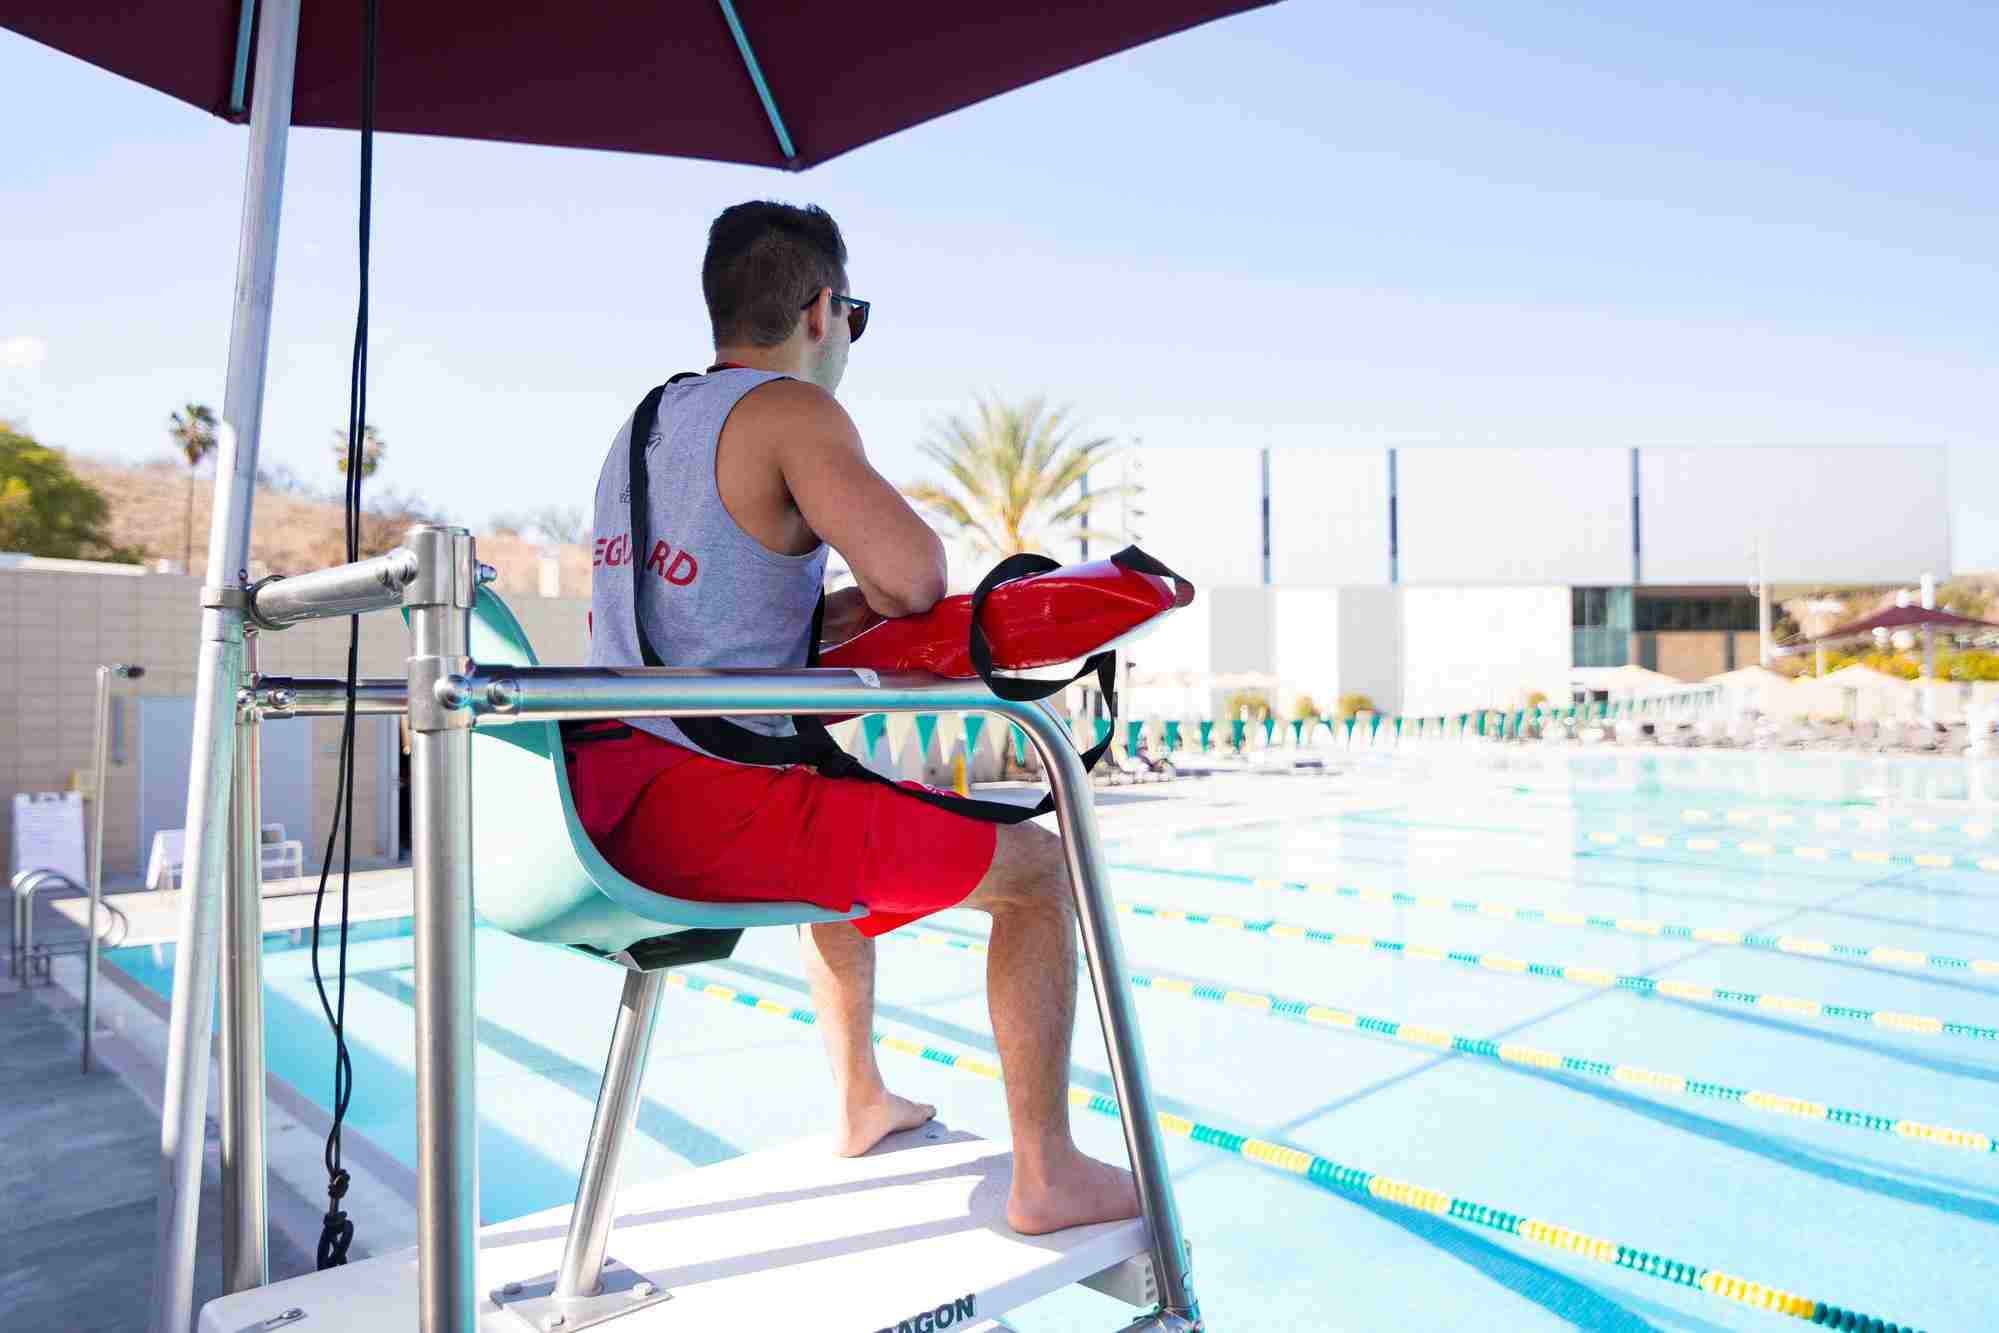 Lifeguard sitting on a watch tower at a pool